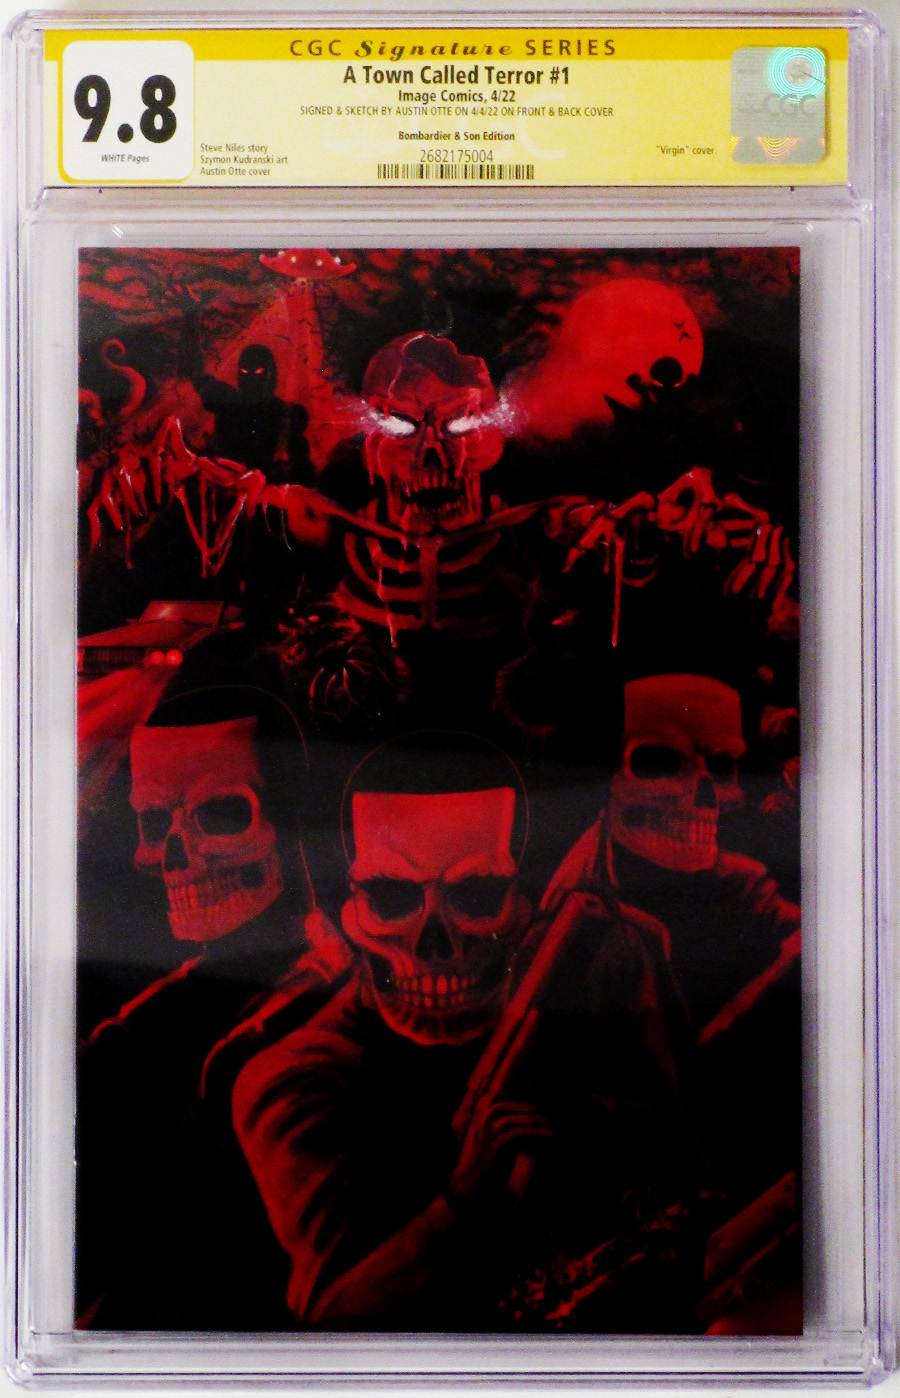 A Town Called Terror #1 Cover D Bombadier & Son Edition Signed CGC Signature Series 9.8